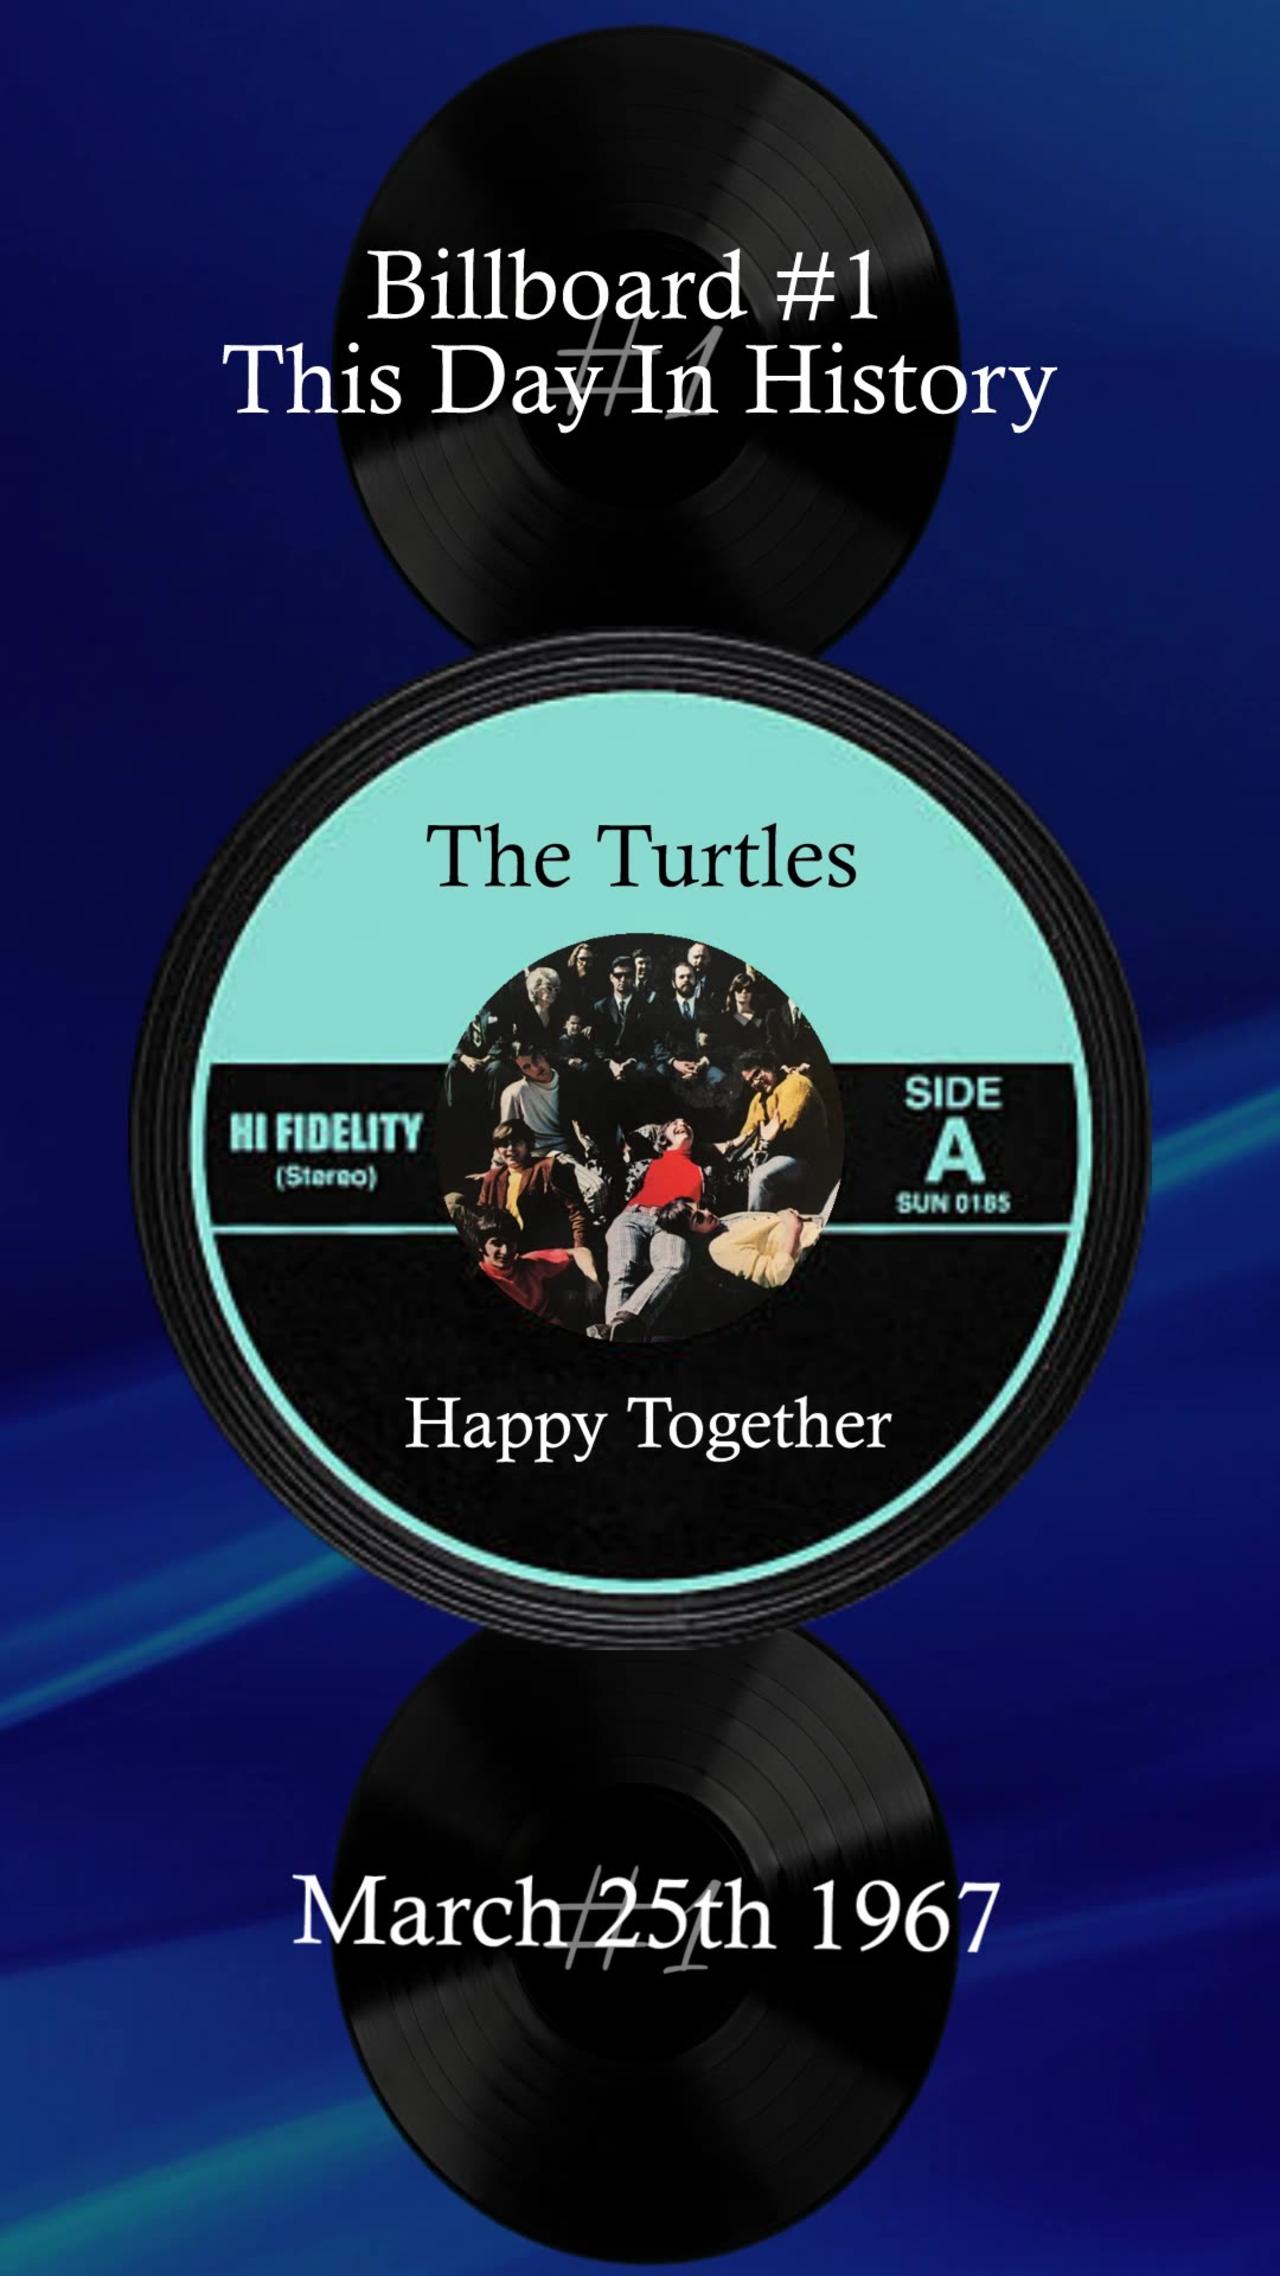 #1🎧 March 25th 1967, Happy Together by The Turtles